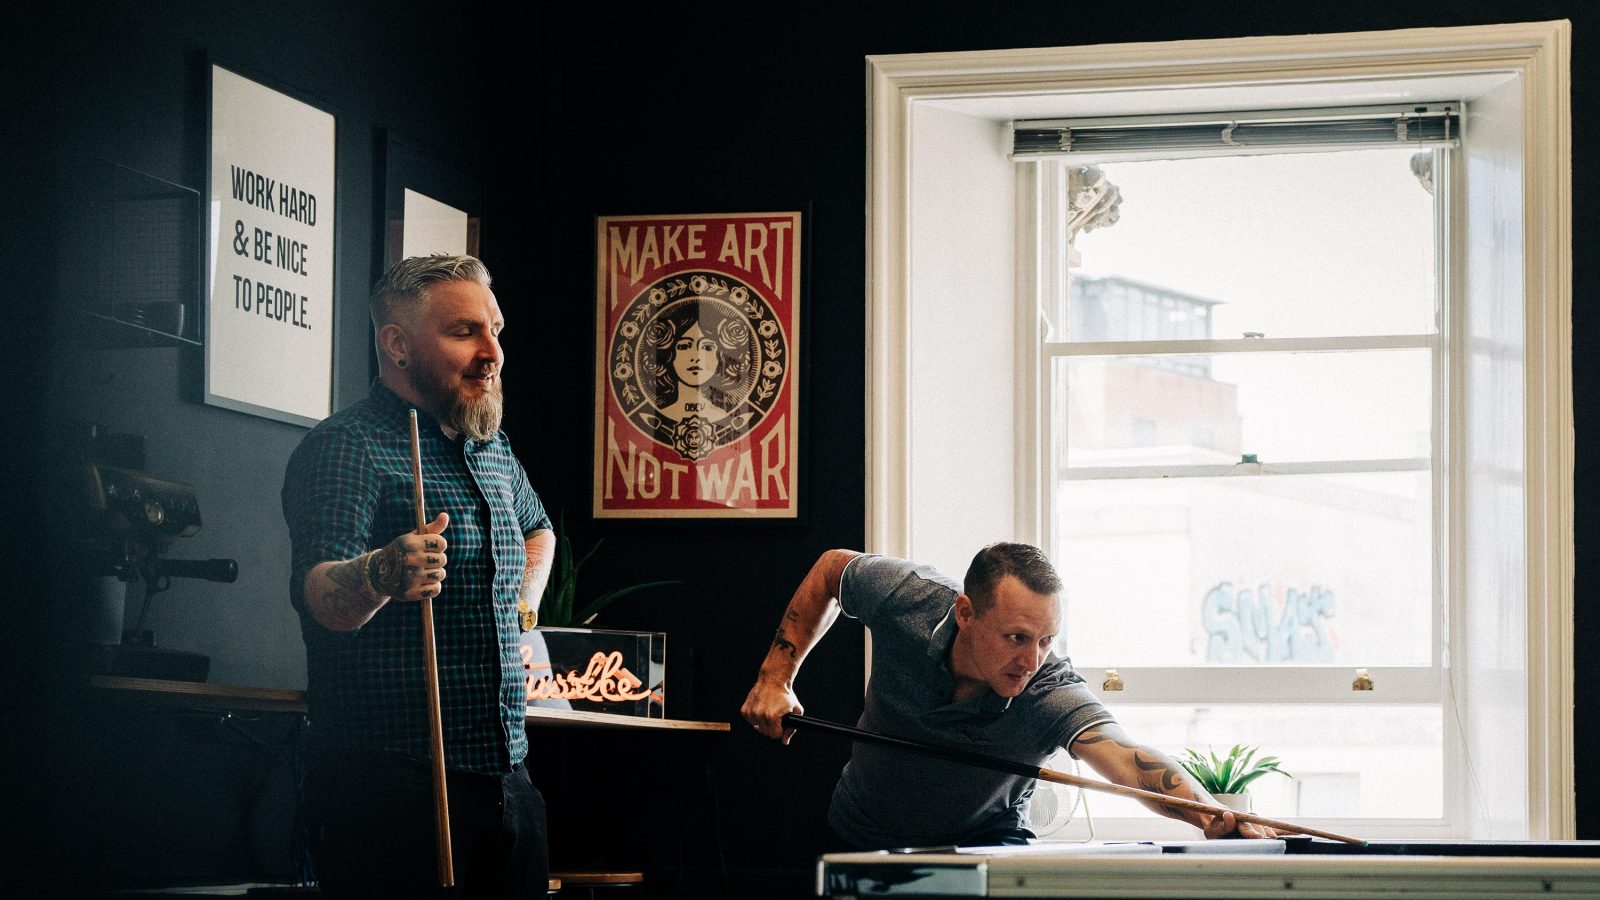 Two men playing pool in a room with dark walls adorned with motivational posters. One man, with a beard, watches while the other, wearing a dark t-shirt featuring a subtle 